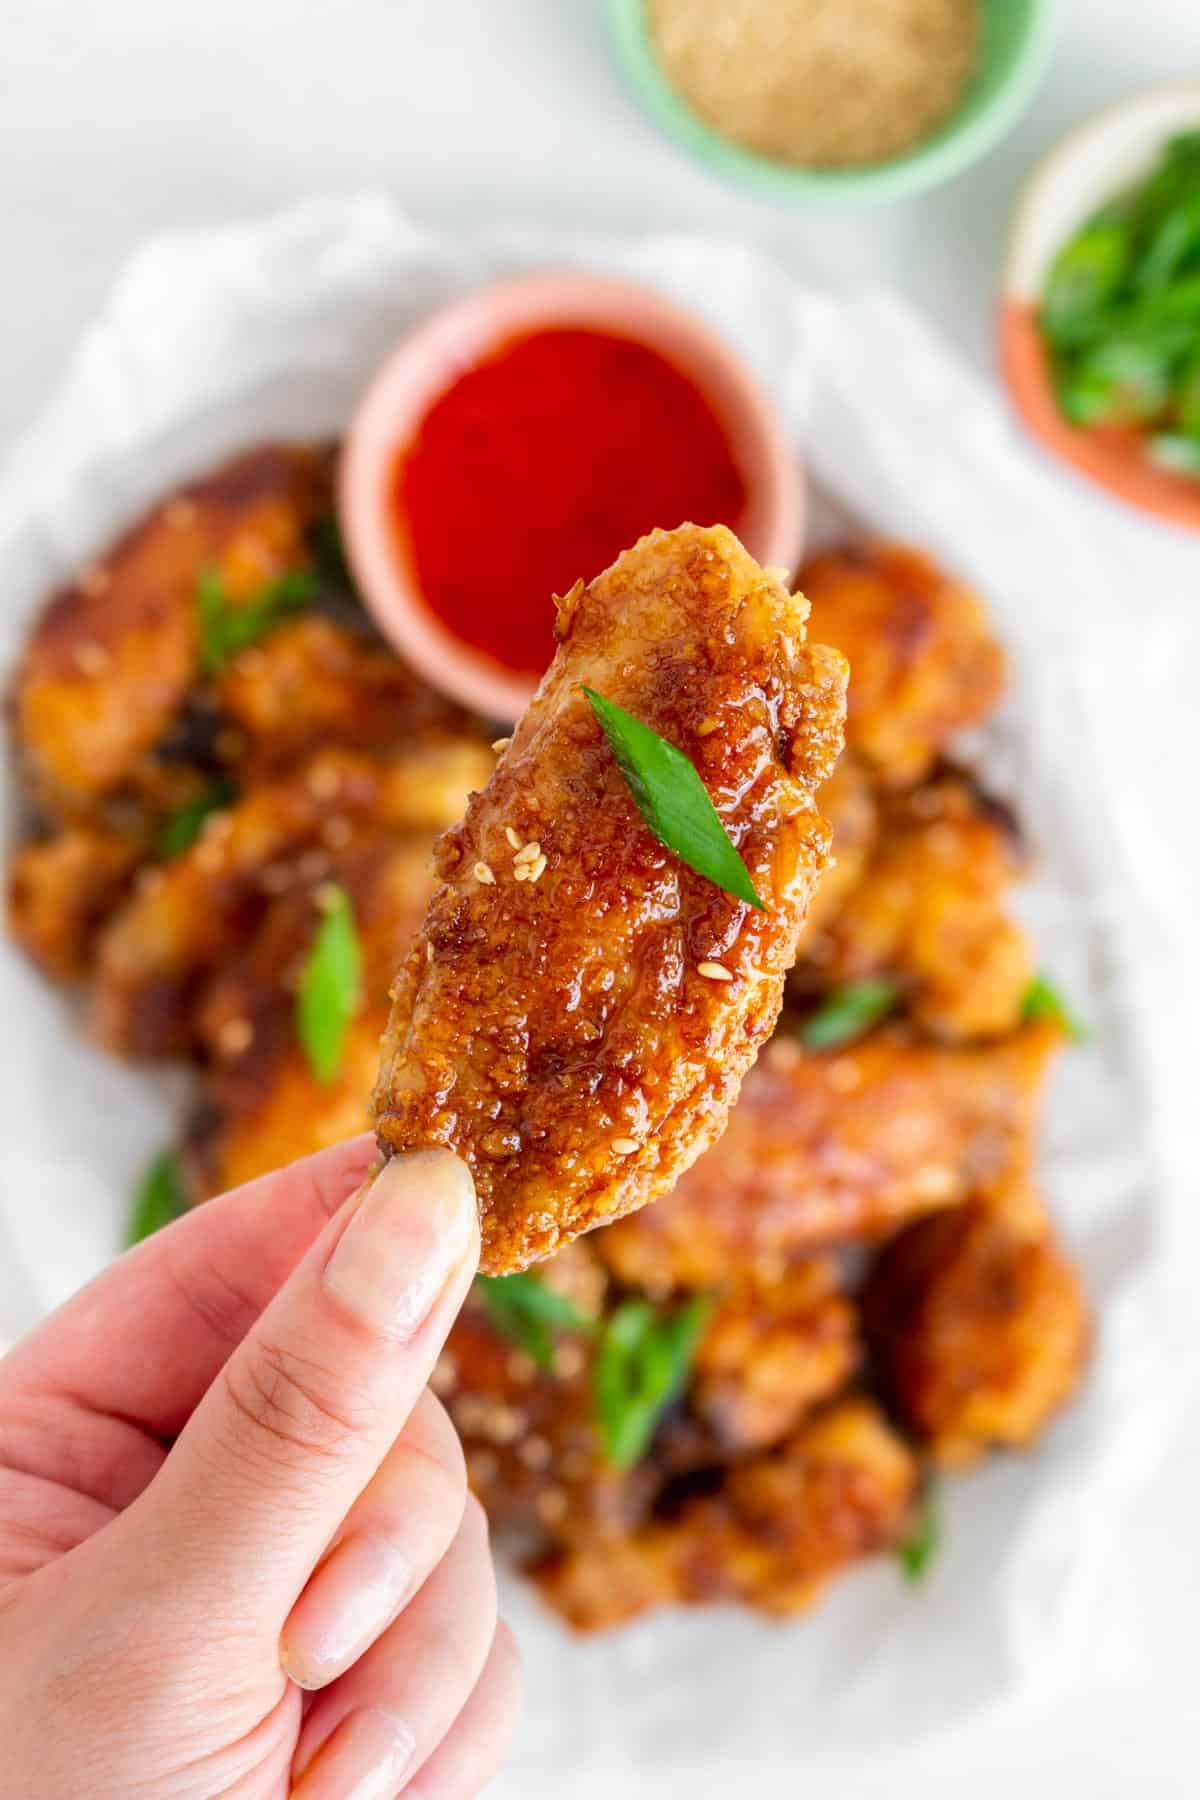 A hand holding up a soy garlic chicken wing.